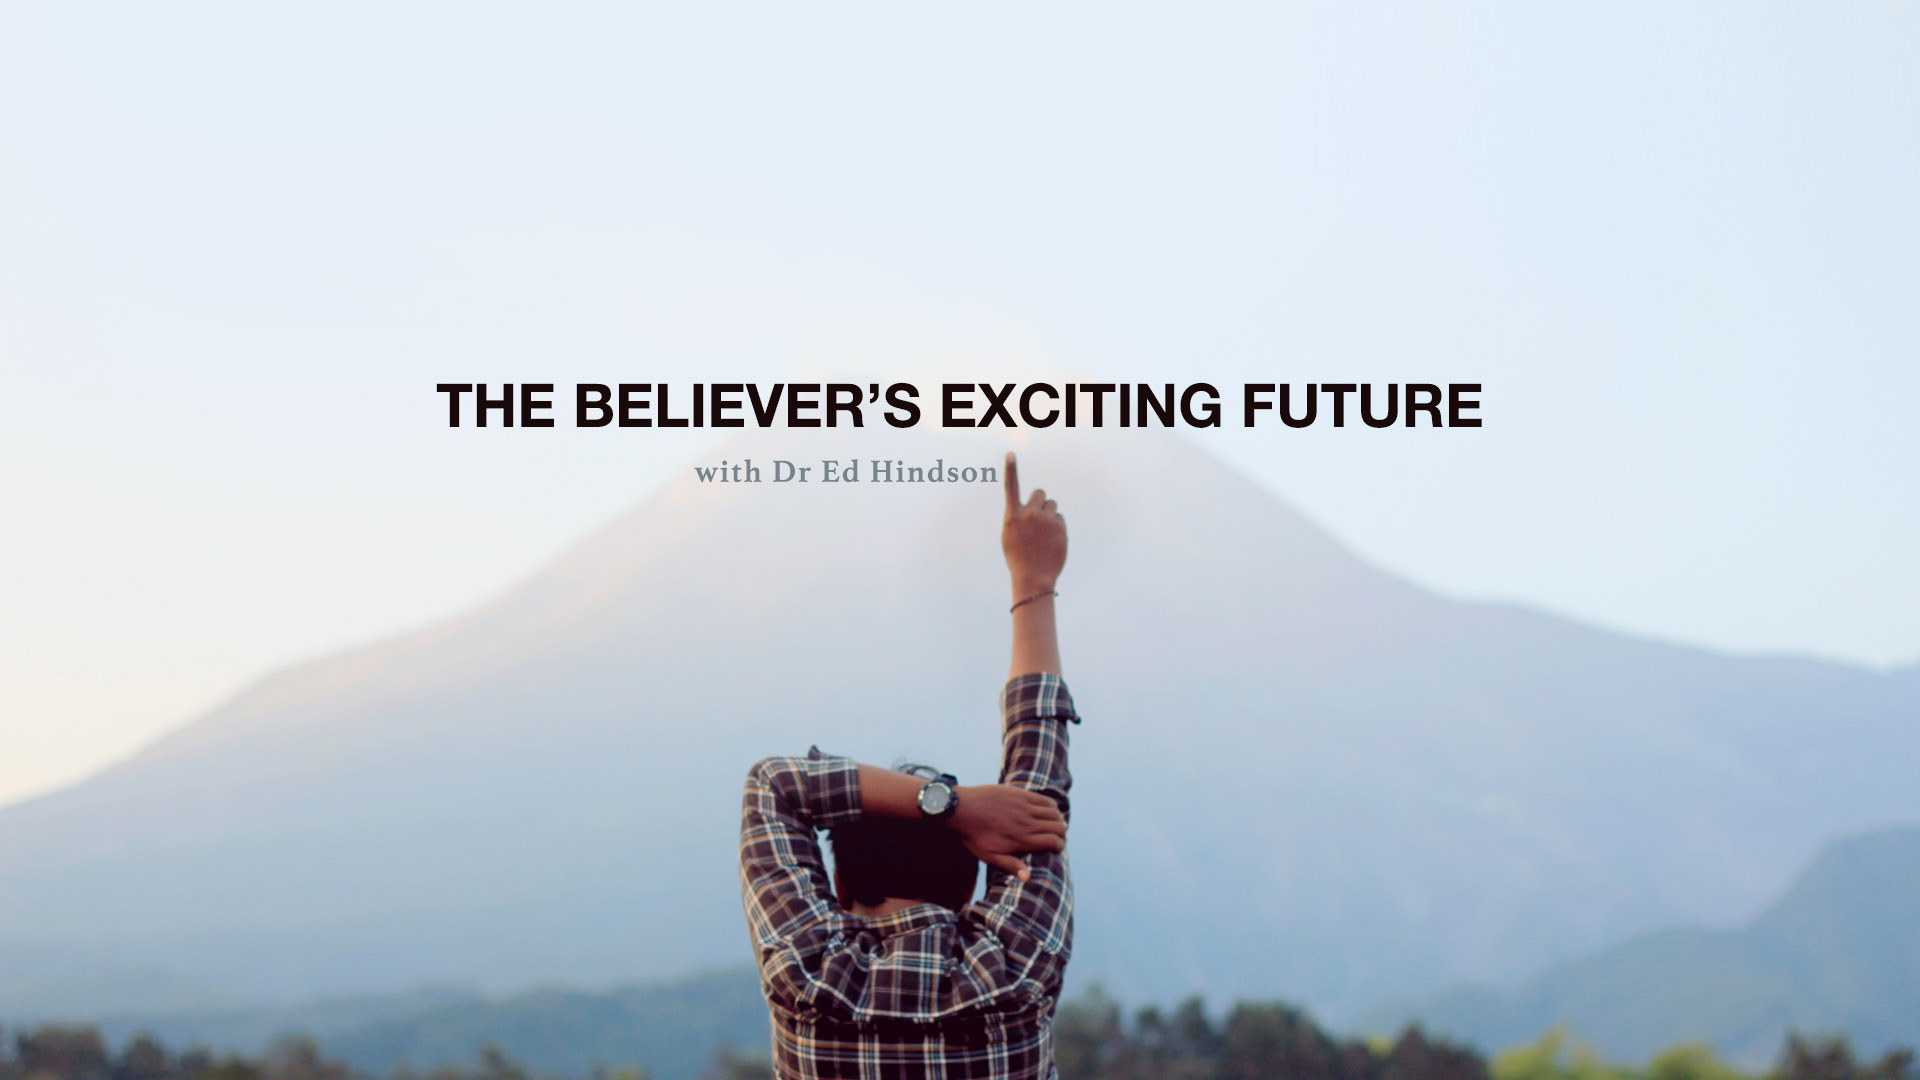 The Believer’s Exciting Future